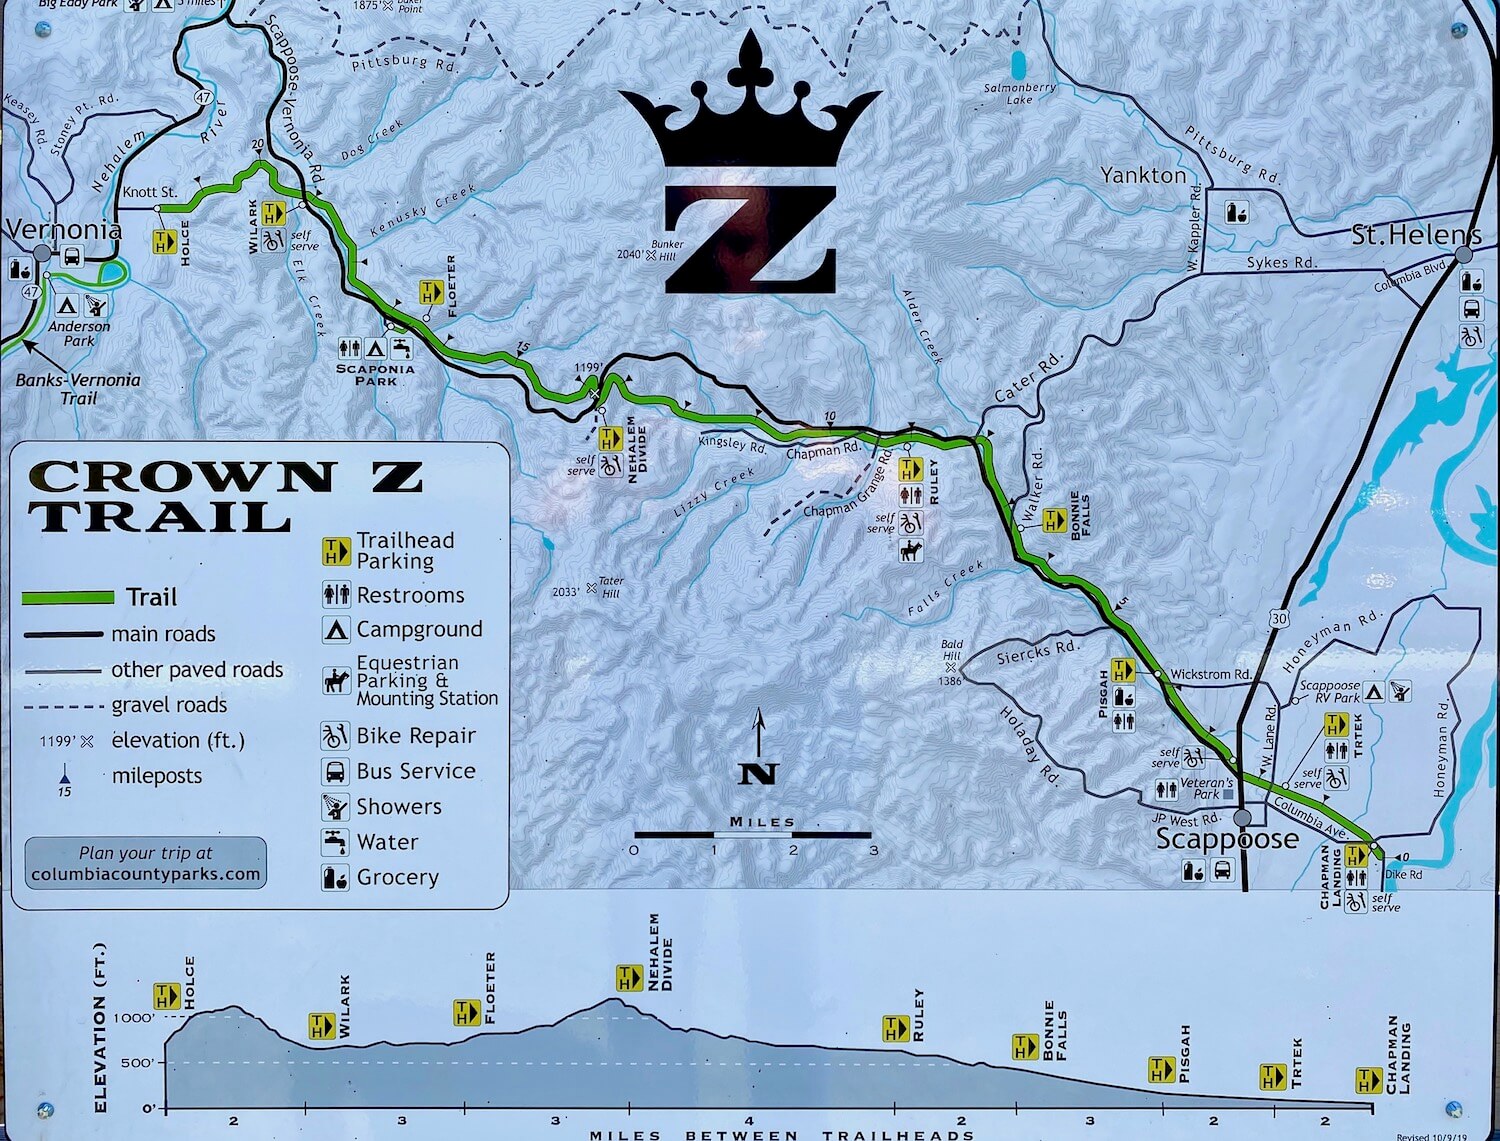 Trailhead sign for the Crown Z Trail in Columbia County shows the elevation of the trail and other important map type information.  The Crown Z trail connects Vernonia, Oregon with Scappoose, Oregon.